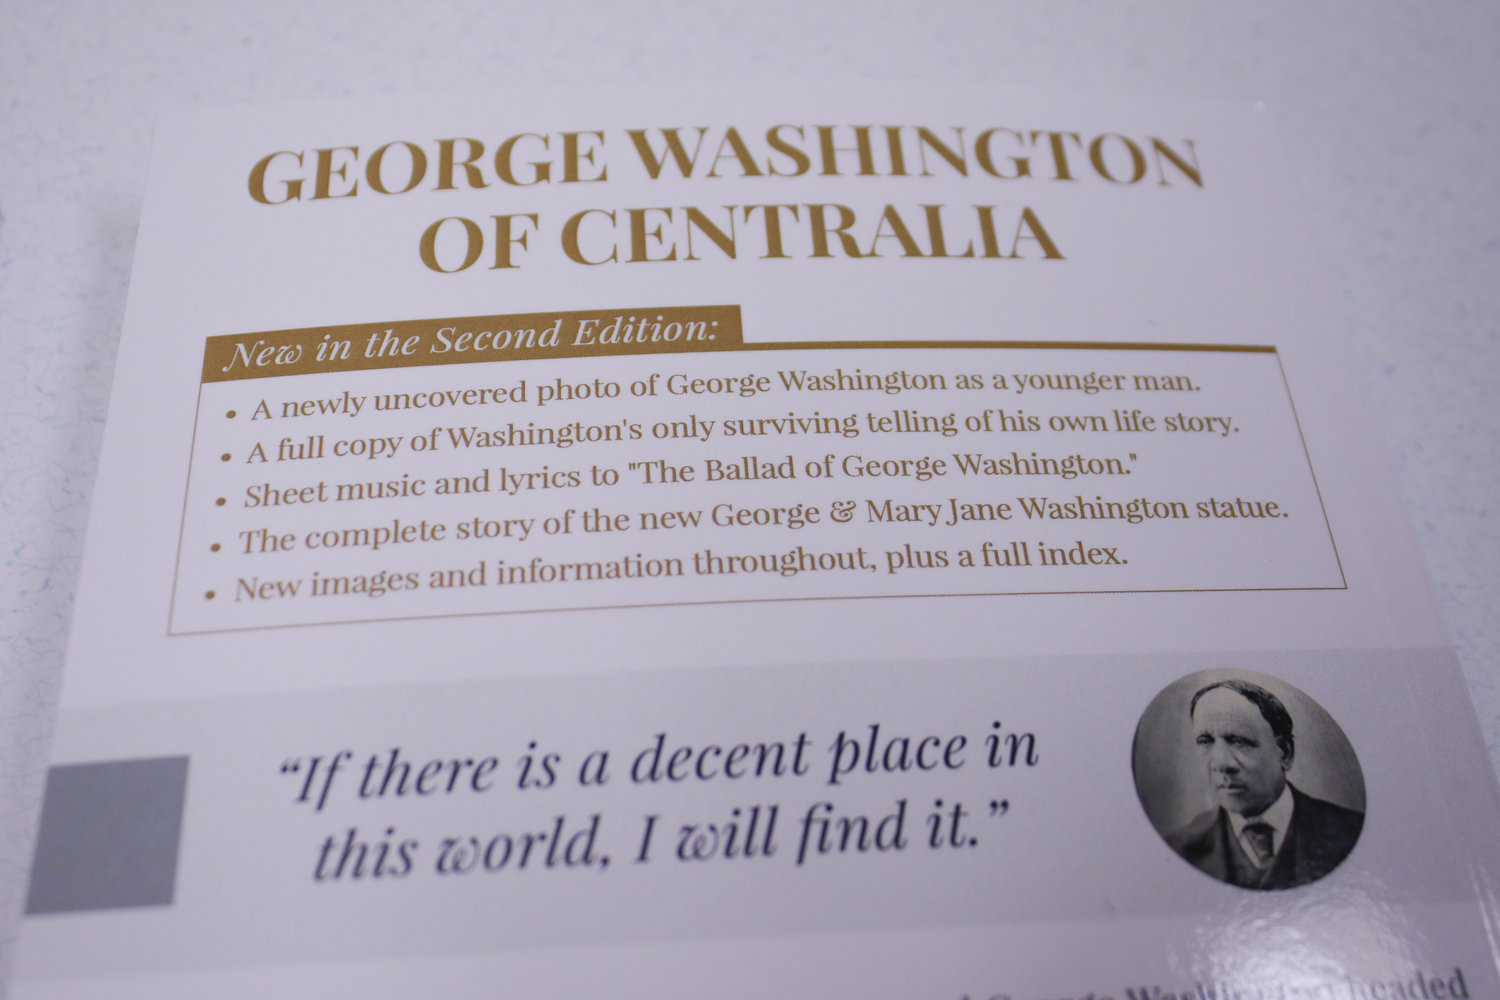 The new second edition features a number of things including a newly uncovered photo of Washington when he was younger and his own life's story in his own words.